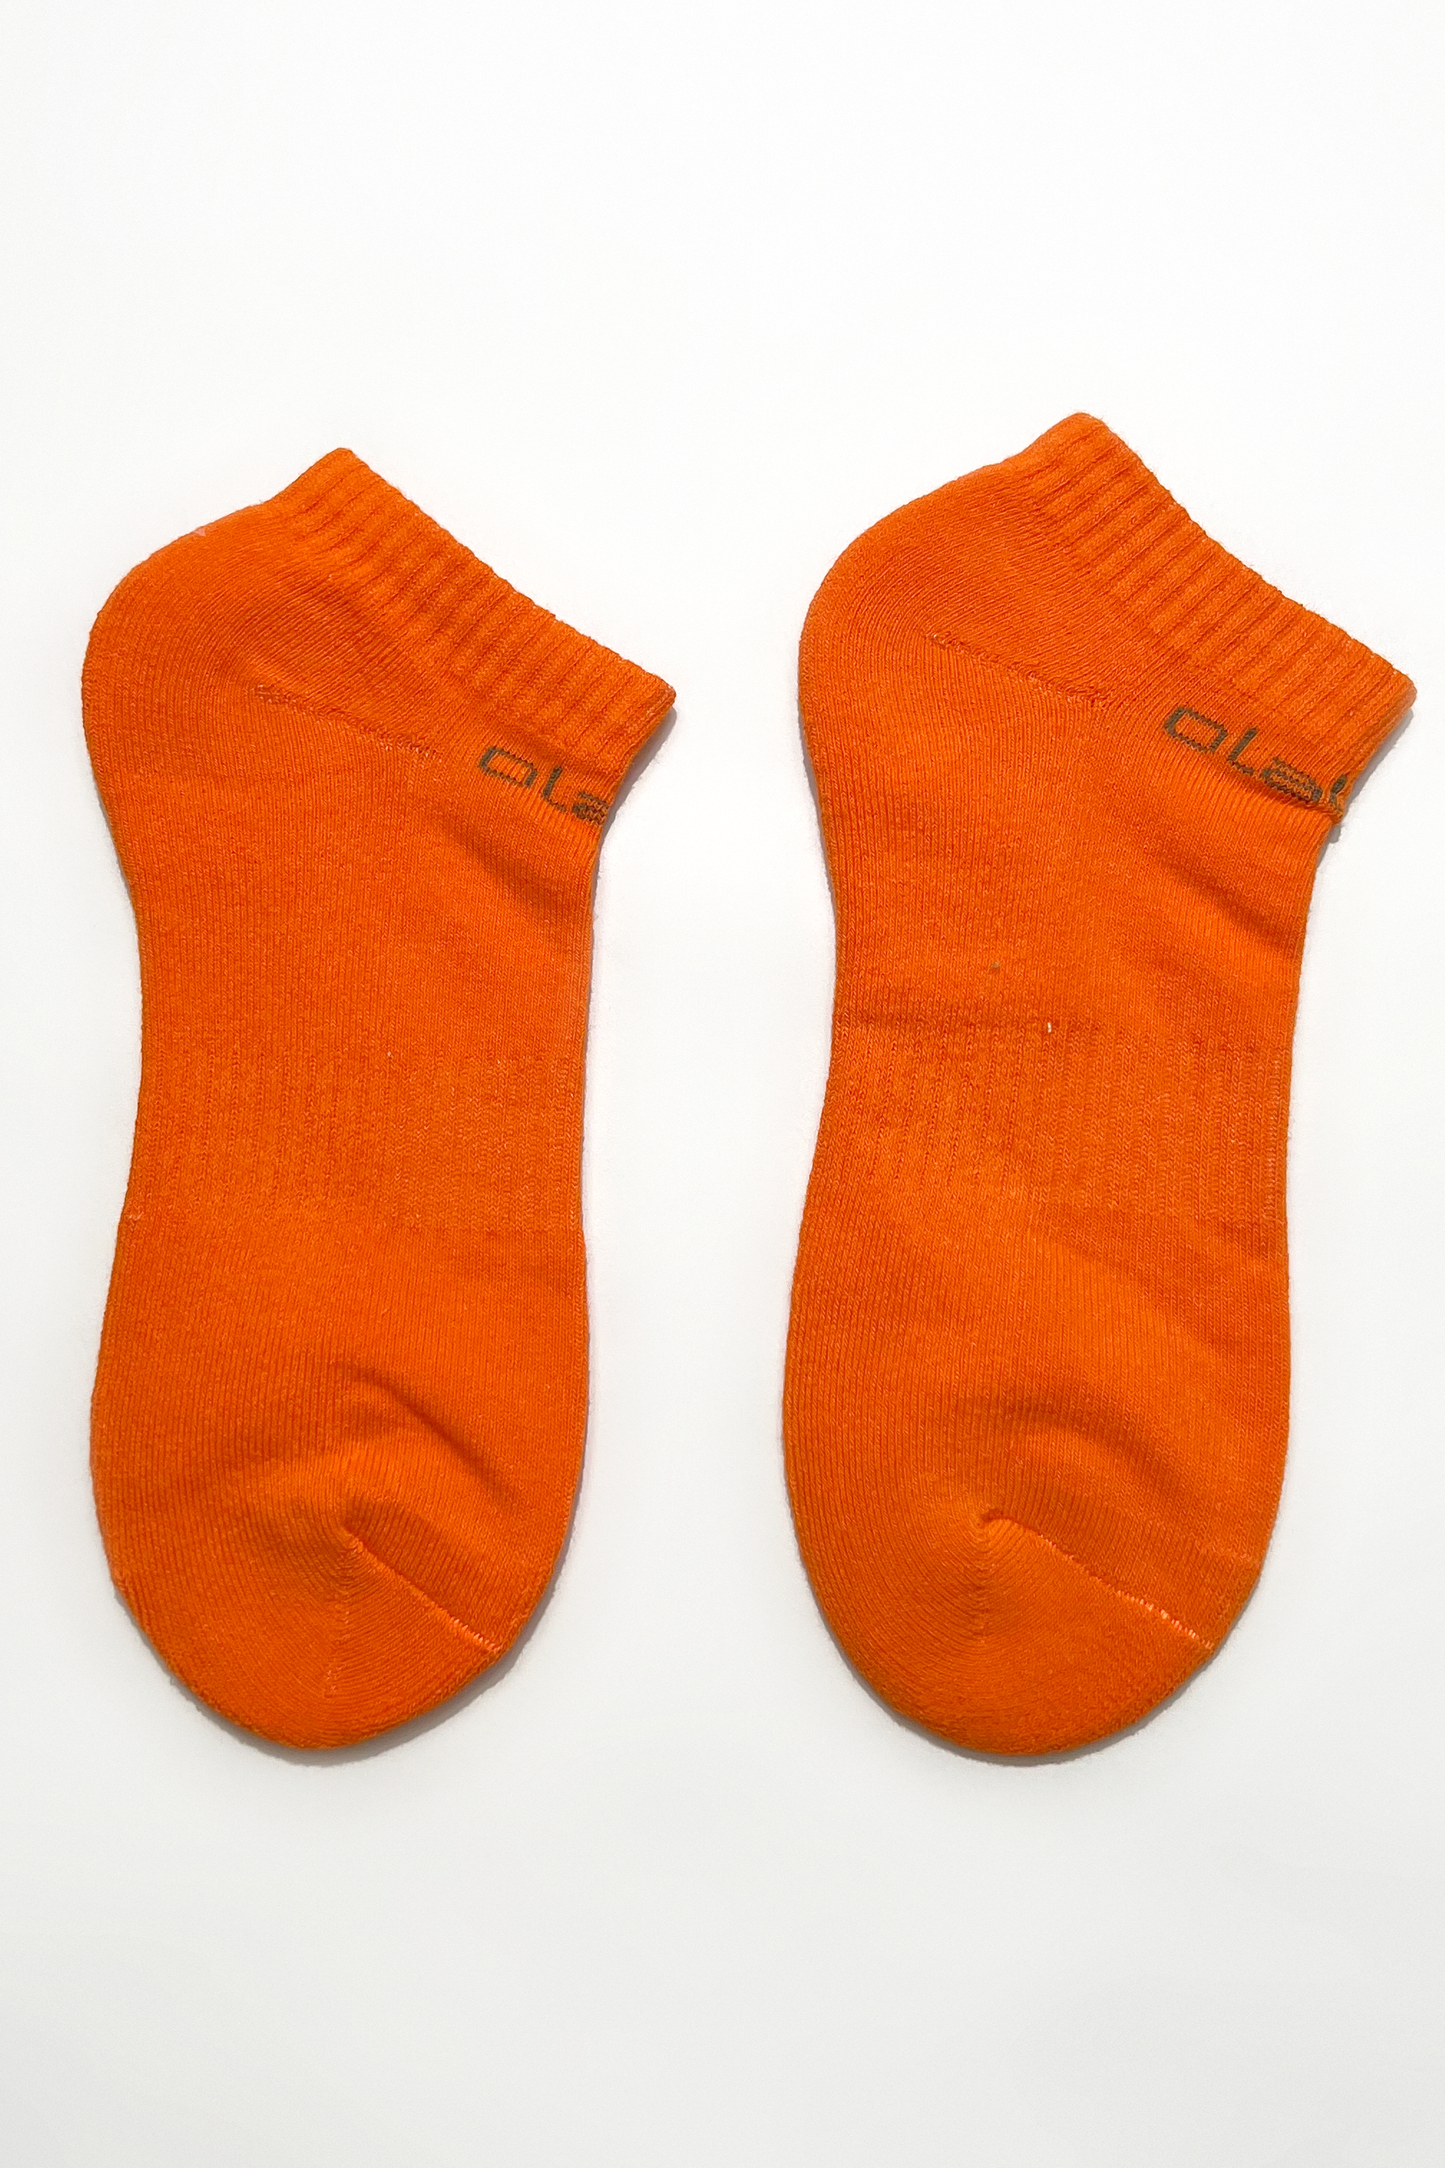 Colorful fall fantasy socks with a short kissy design in vibrant orange - OW-0152-USO-OR_2.png